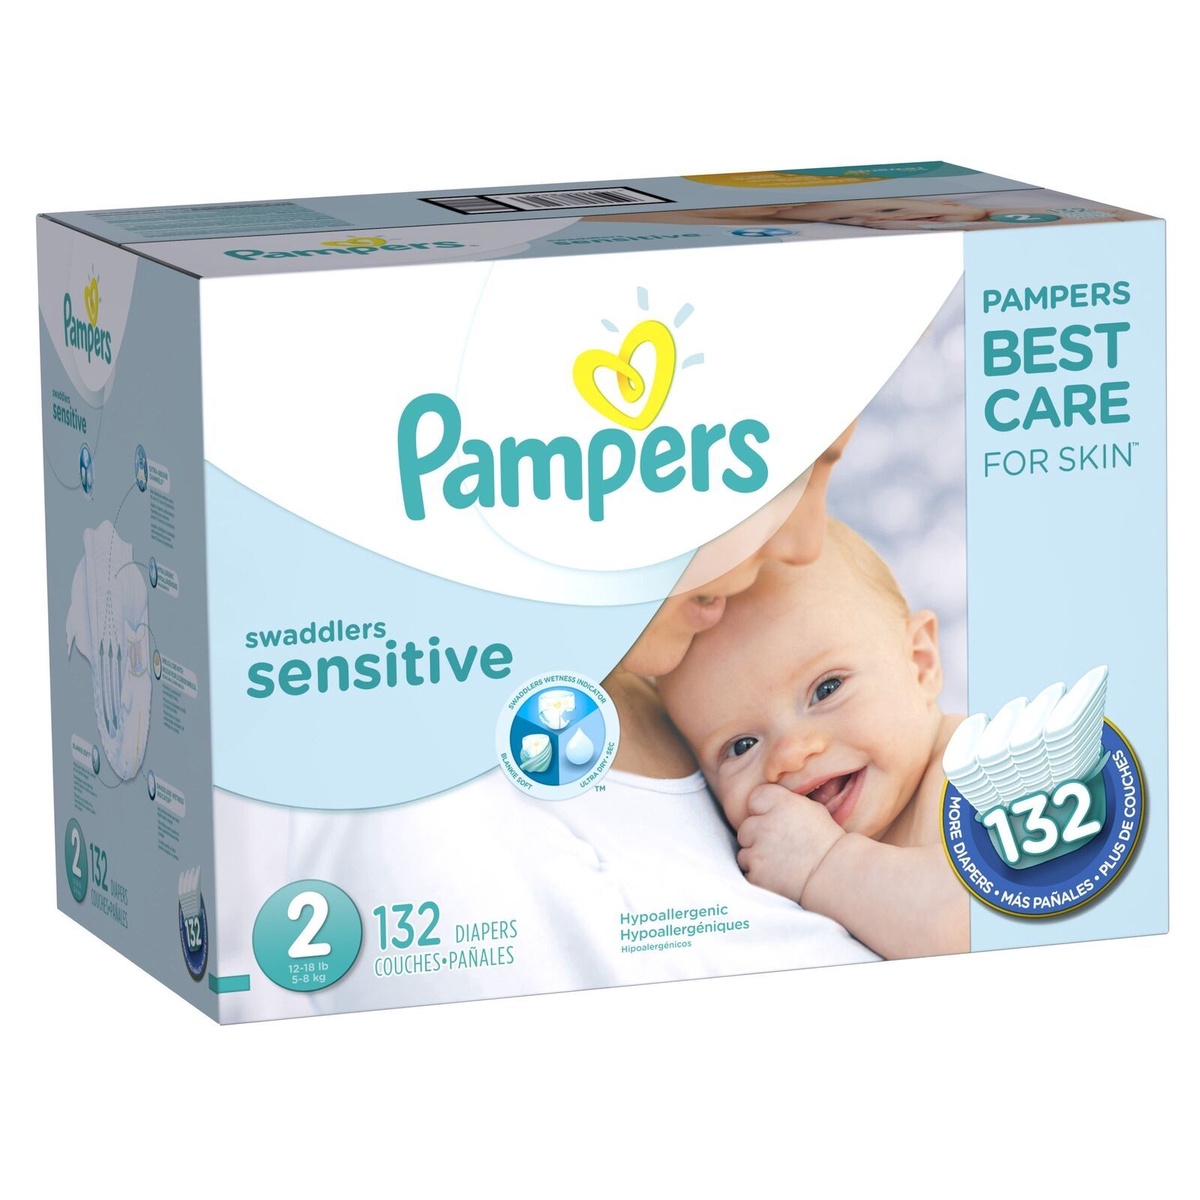 The Best Diapers For Sensitive Skin (And Why Your Kids Need Them)